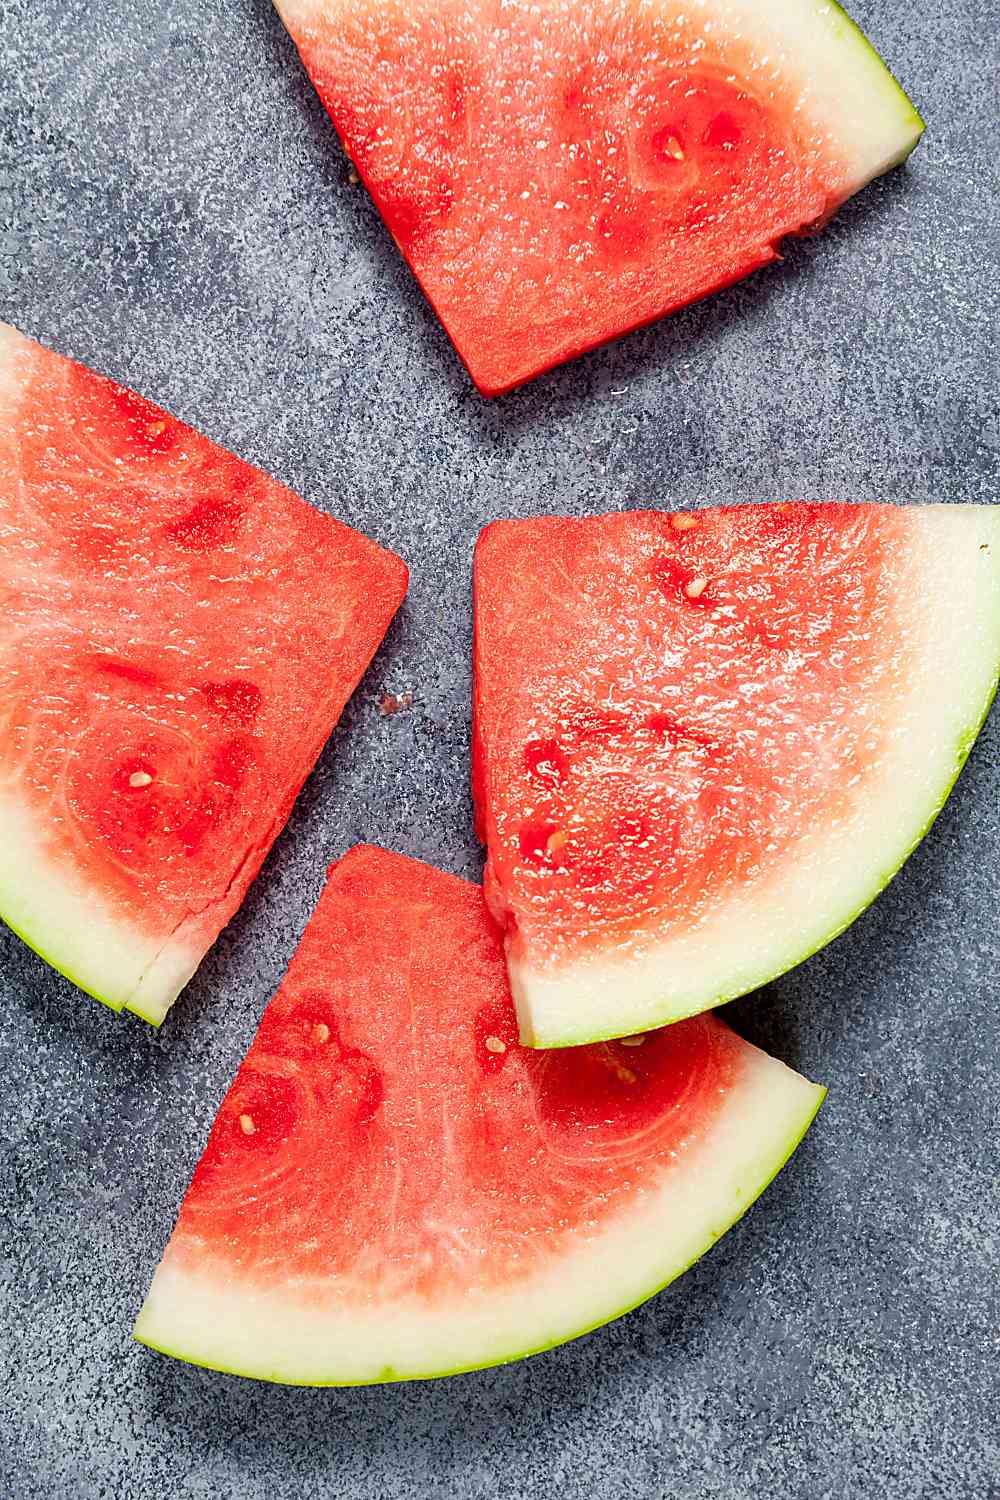 Overhead view of sliced watermelon on a speckled background. 